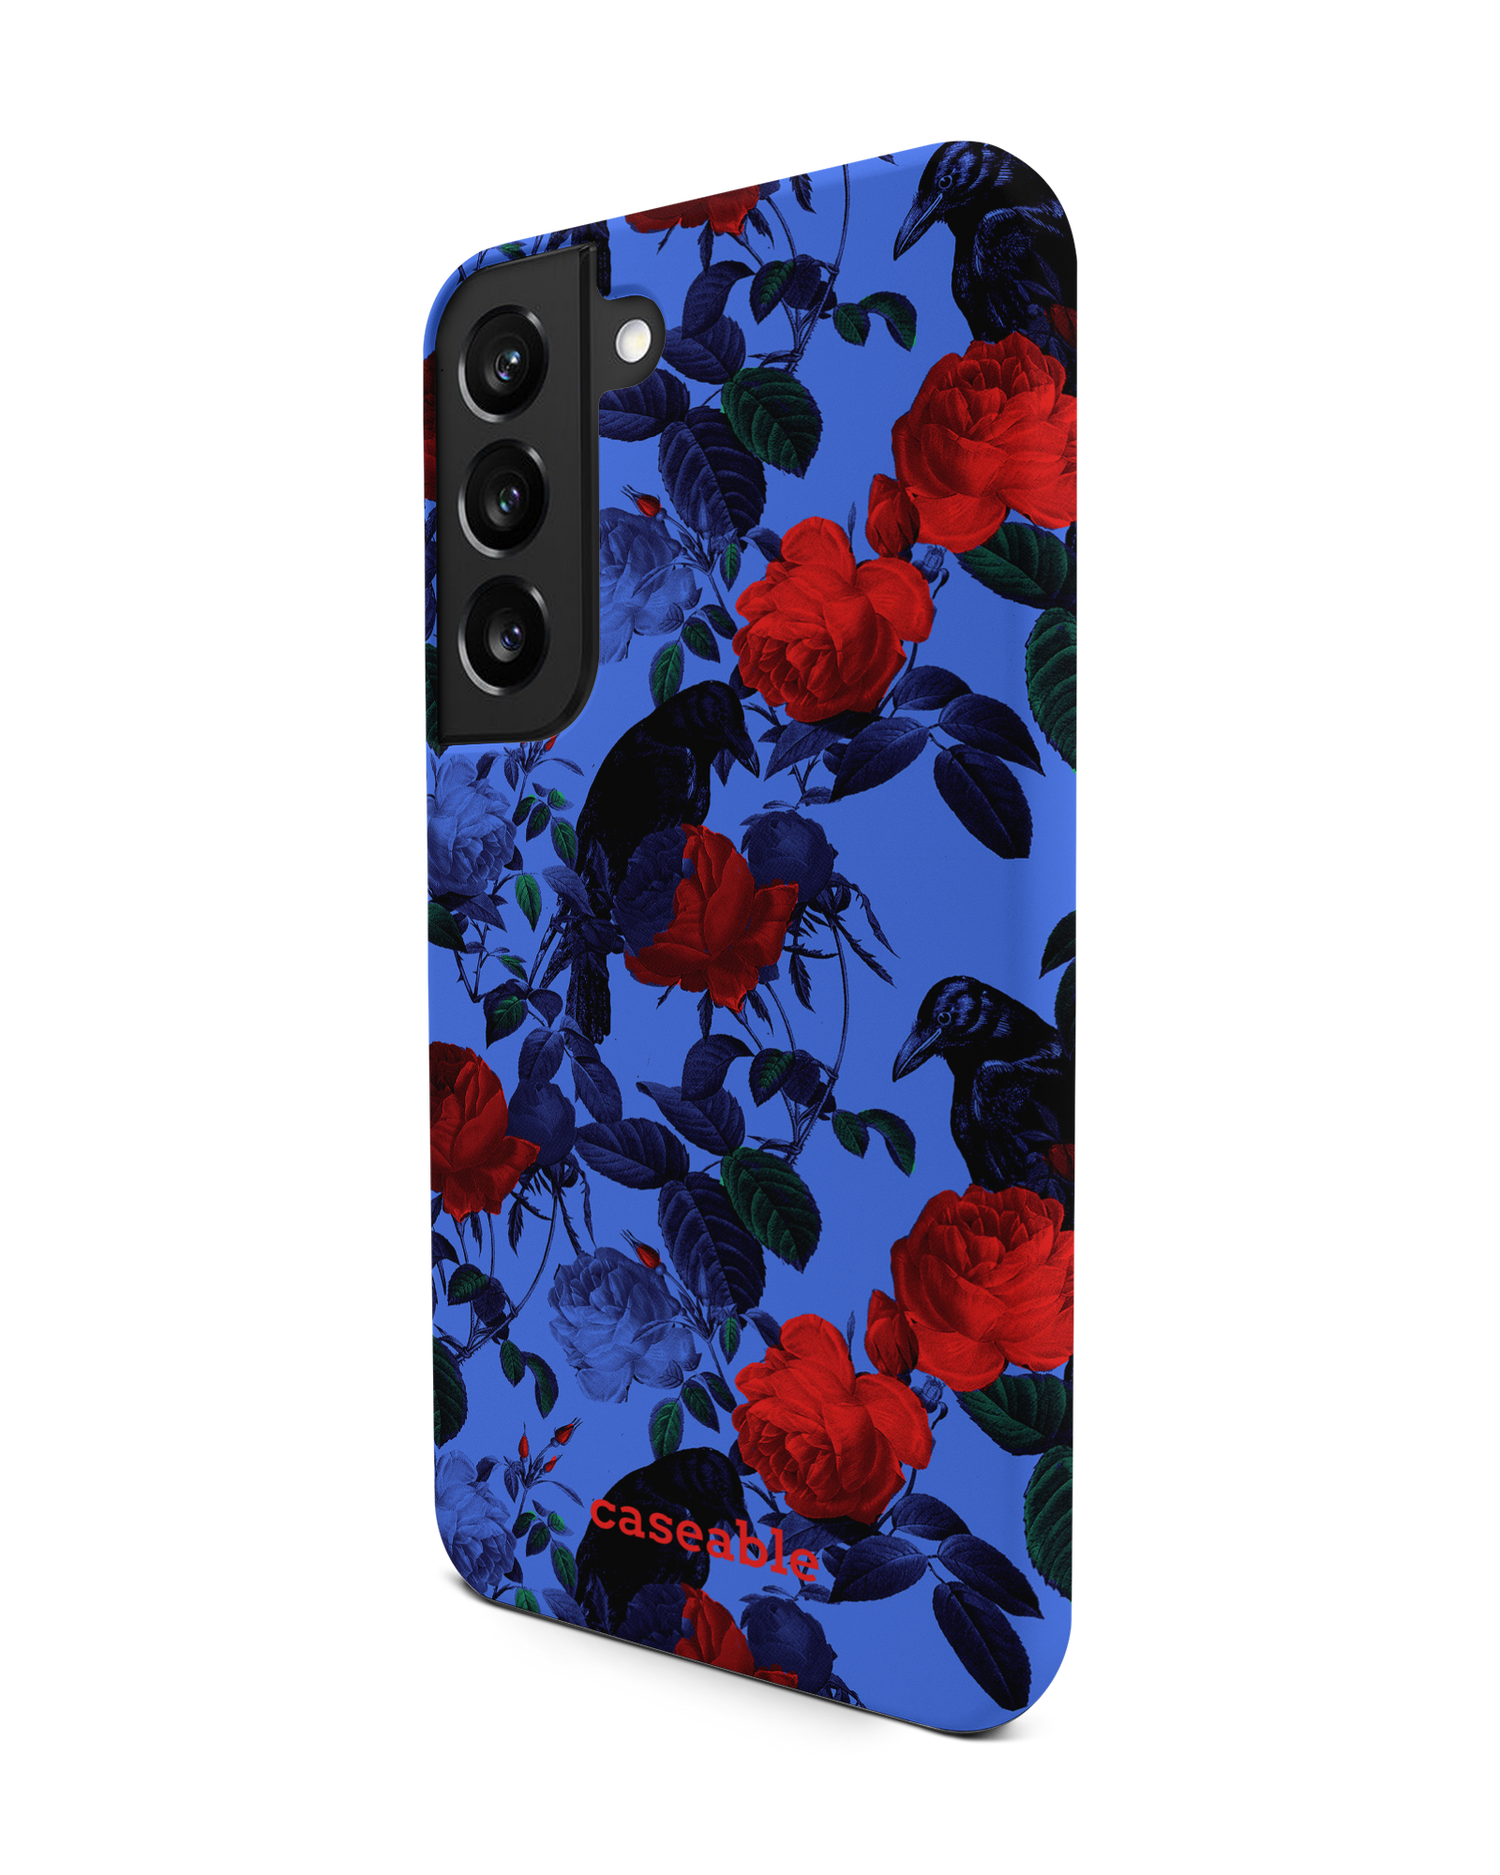 Roses And Ravens Premium Phone Case Samsung Galaxy S22 5G: View from the right side